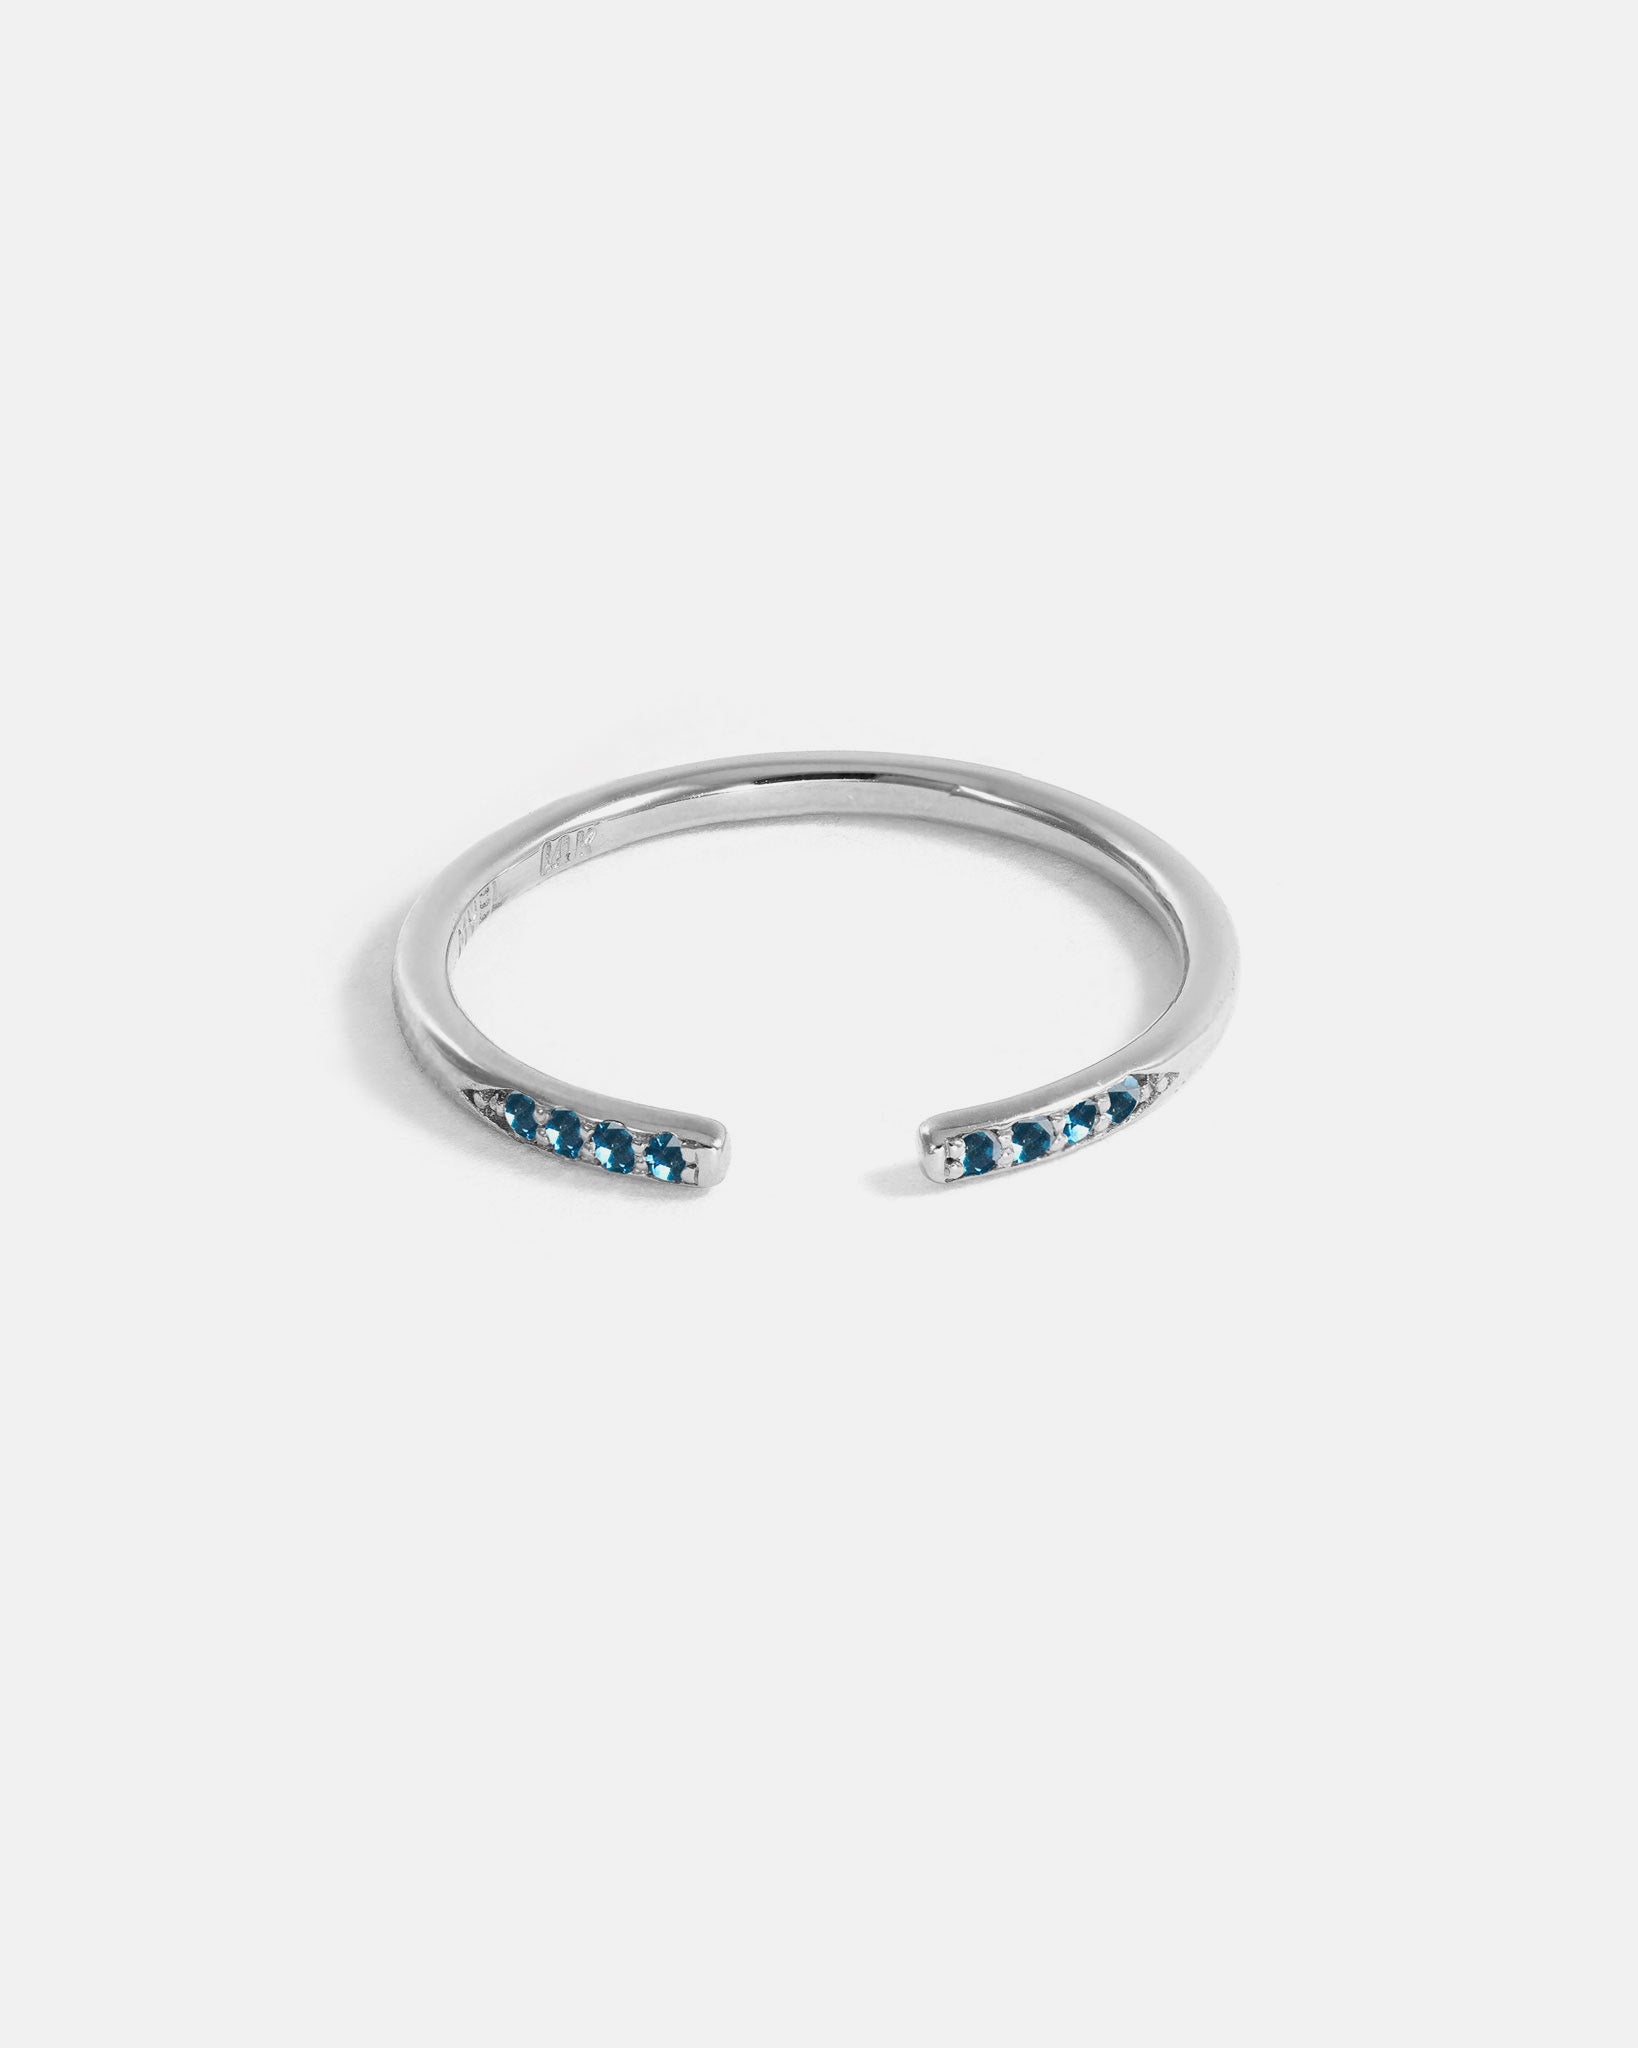 Classic Open Ring in 14k White Gold with Ethical Birthstones